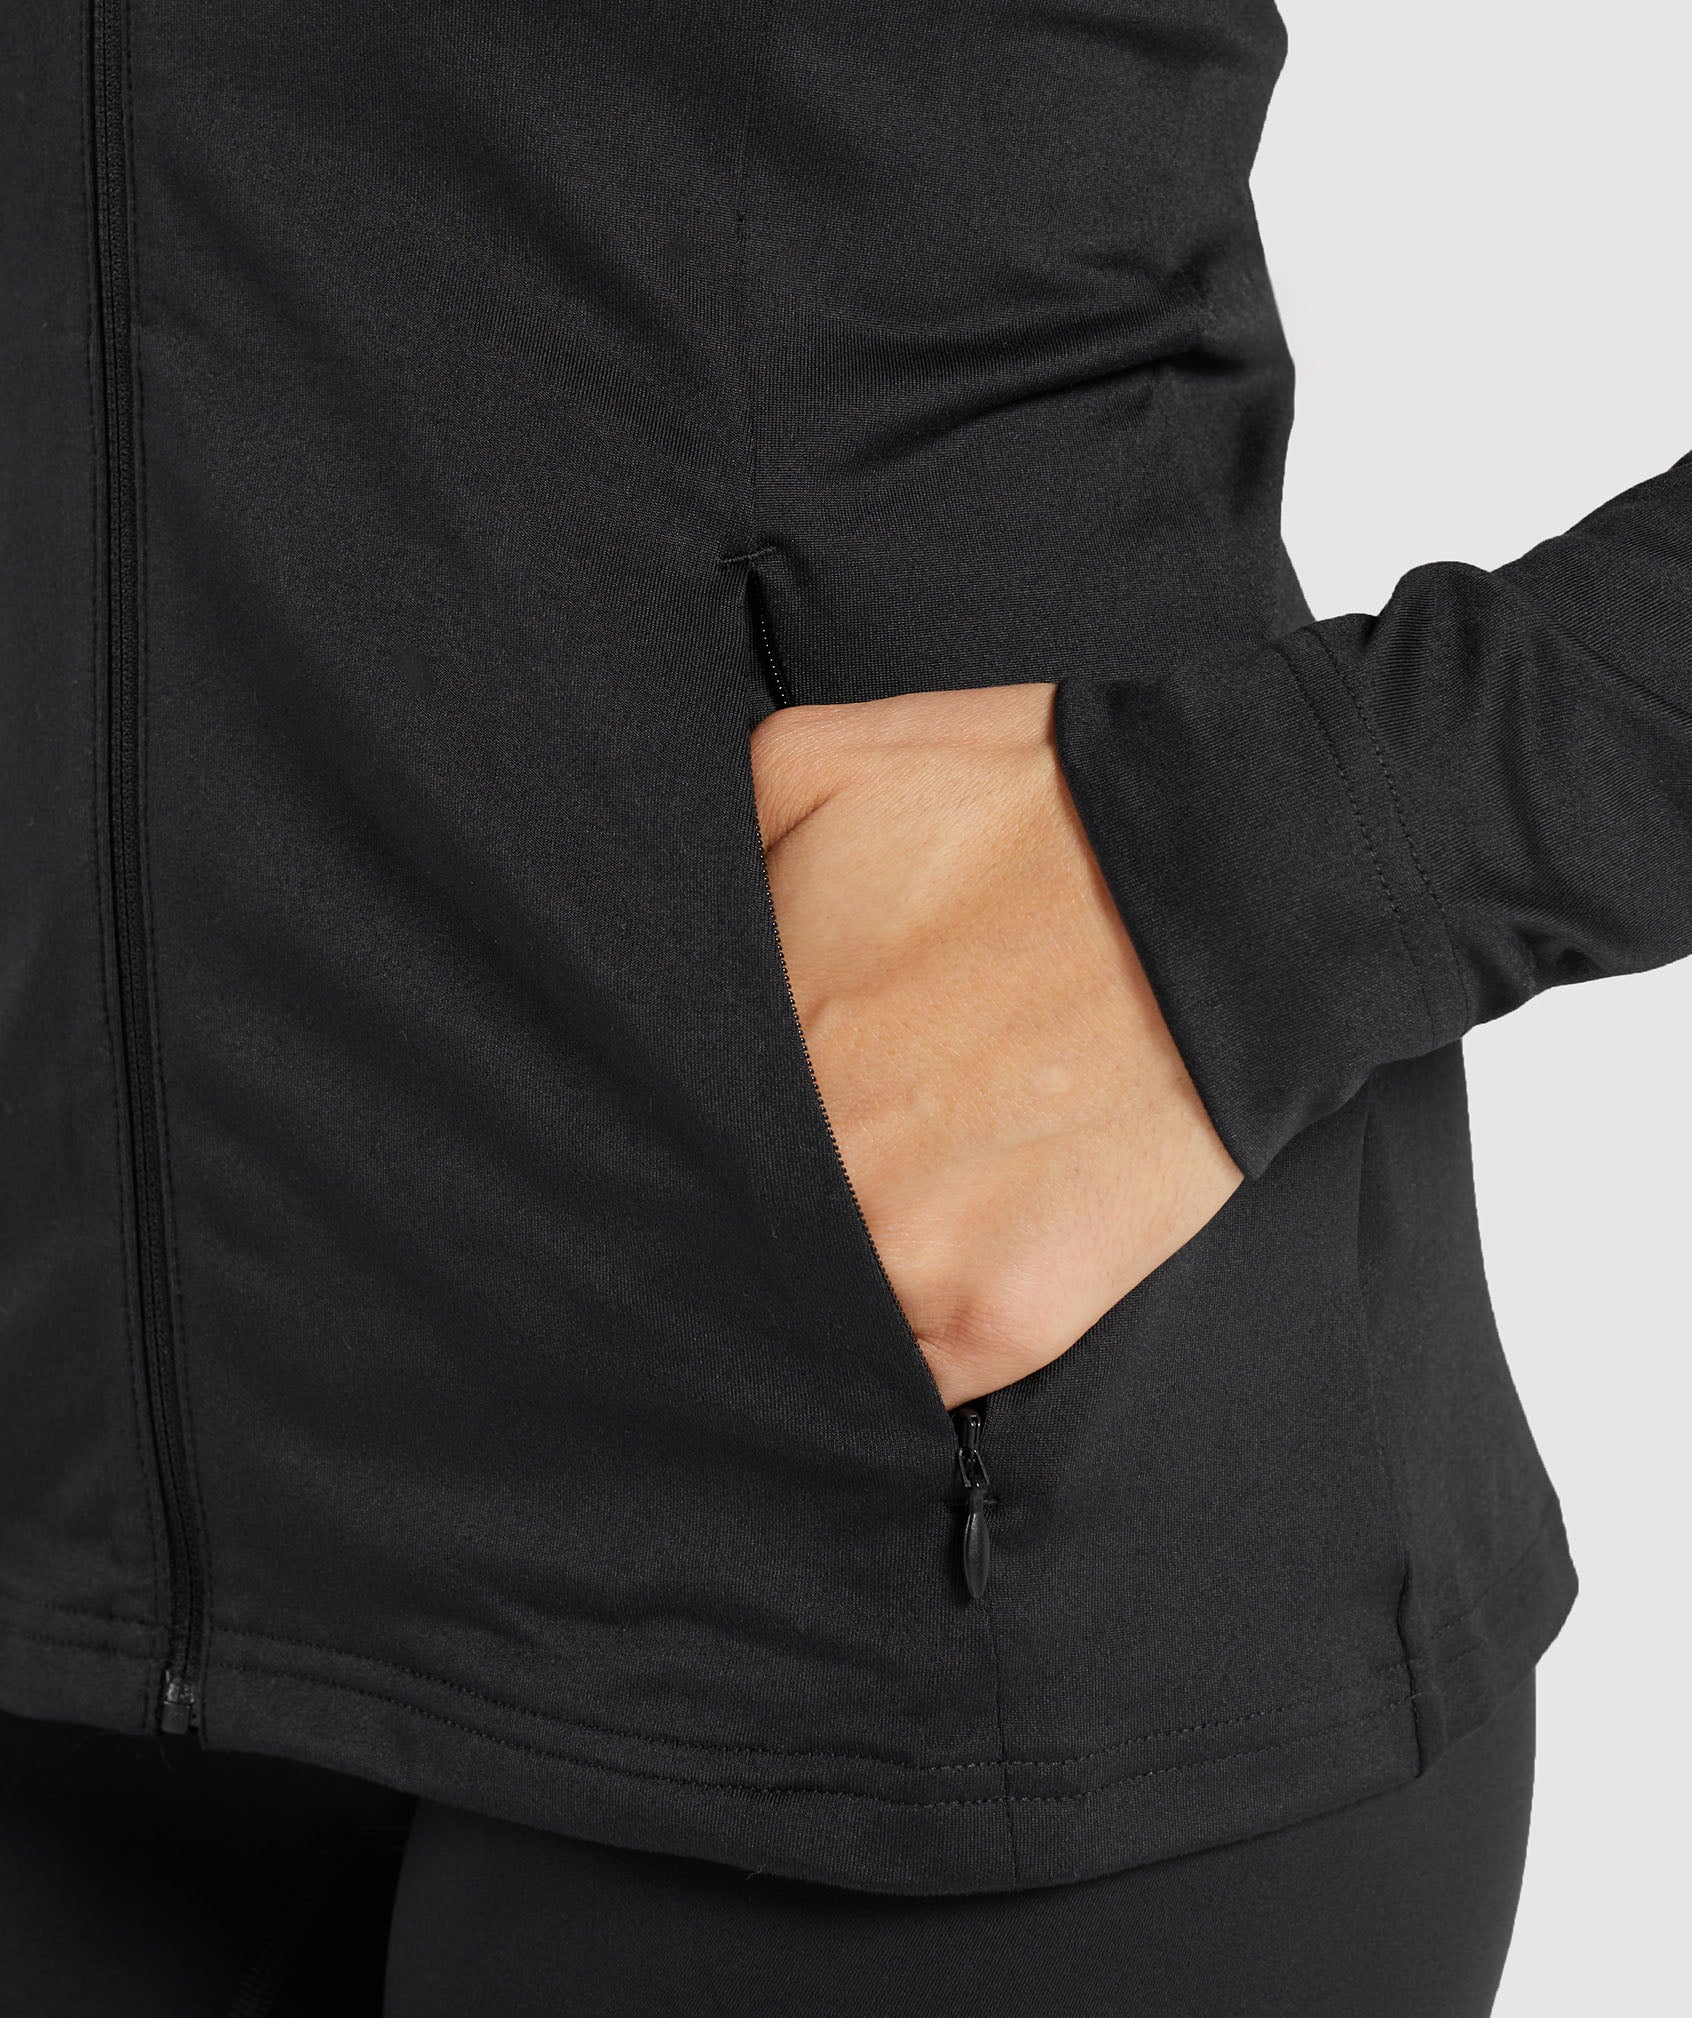 Training Jacket in Black - view 5